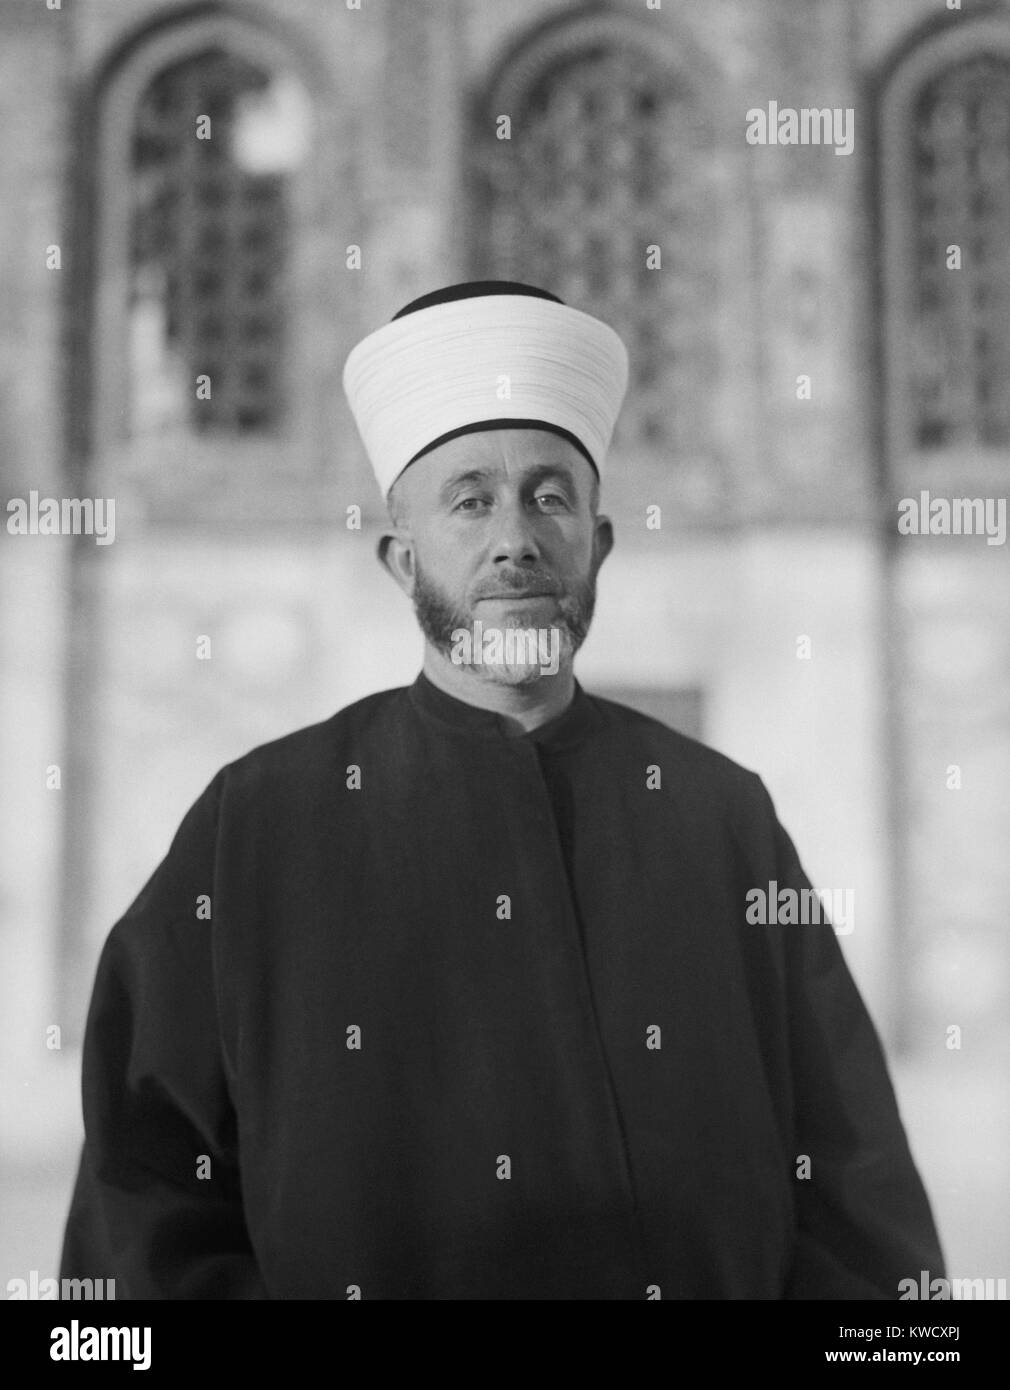 Hajj Amin Al Husseini, the most powerful Arab nationalist in Mandatory Palestine in 1929. He opposed Jewish immigration and led the political party, Arab Higher Committee, until it was outlawed in 1937 (BSLOC 2017 1 122) Stock Photo